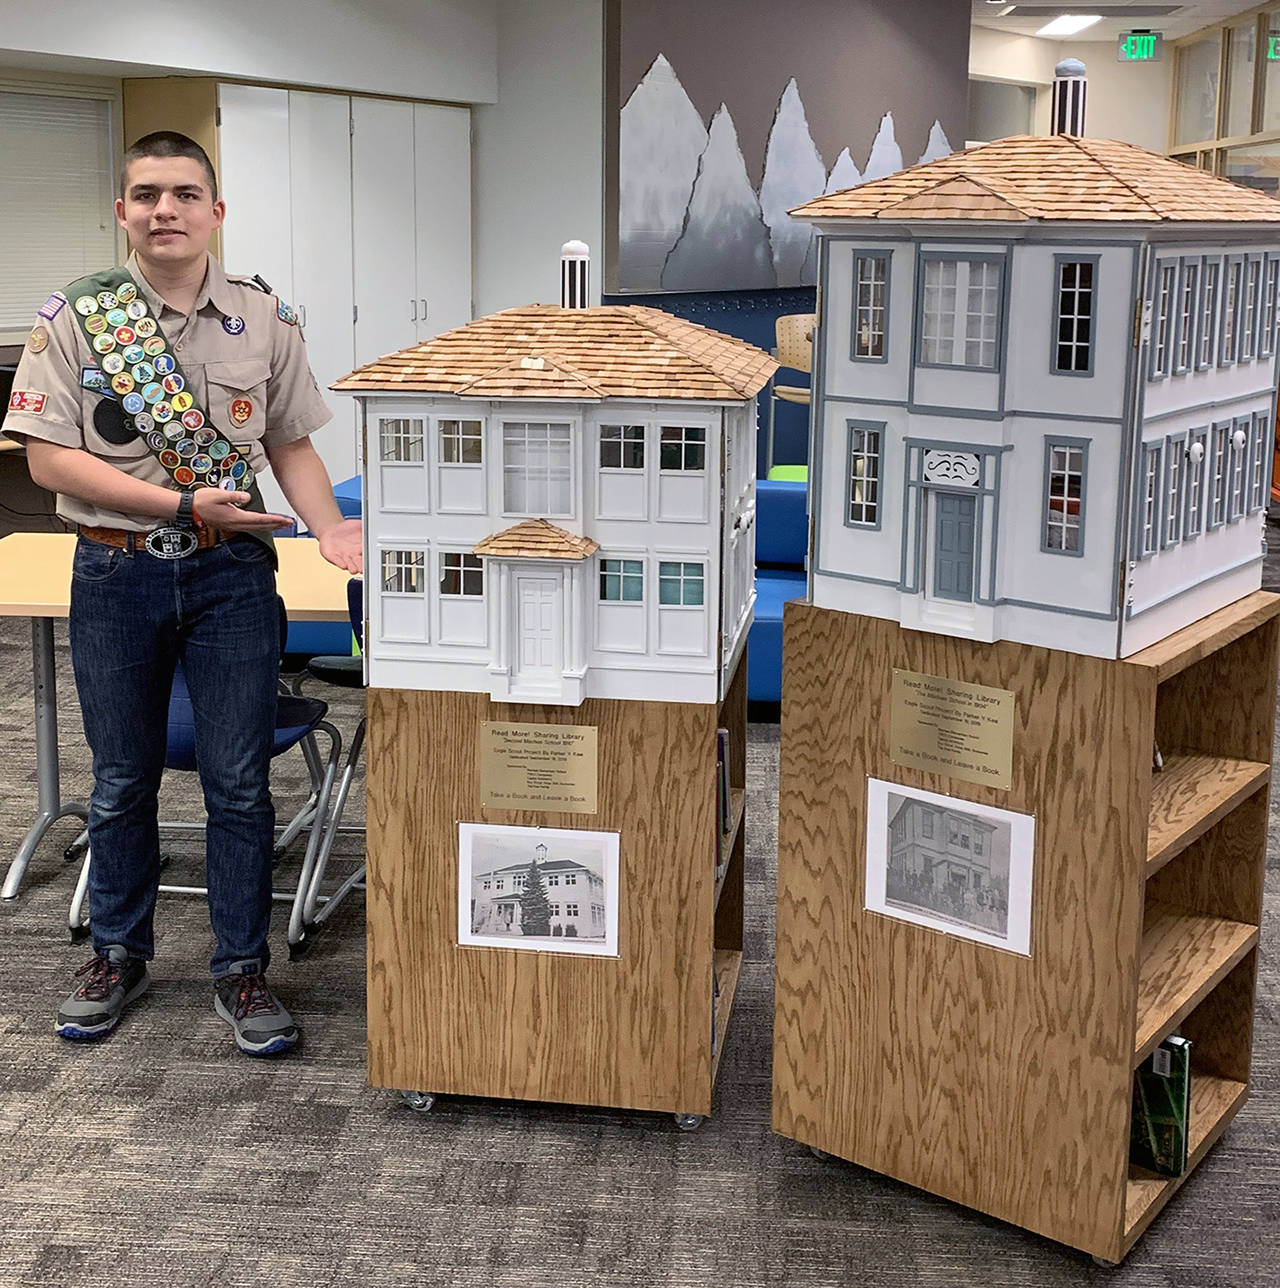 Eagle Scout candidate Parker Kee presented his “Read More!” Sharing Libraries to Machias Elementary School staff and teachers. (Submitted photo)